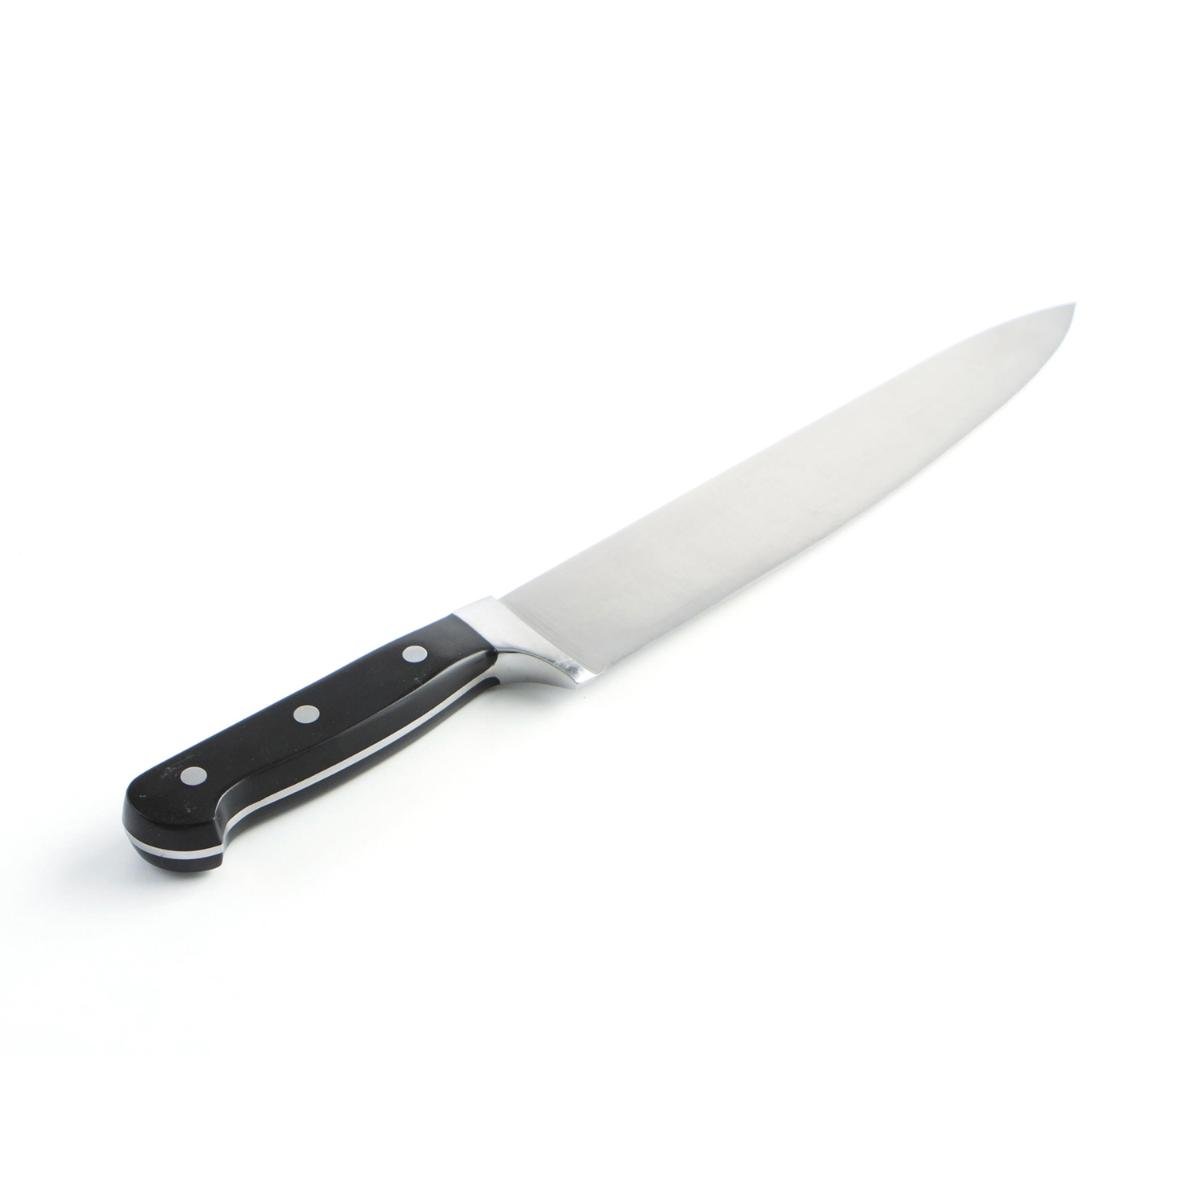 CHEF STAINLESS STEEL KNIFE, Quid Professional, Brands, Common, Products